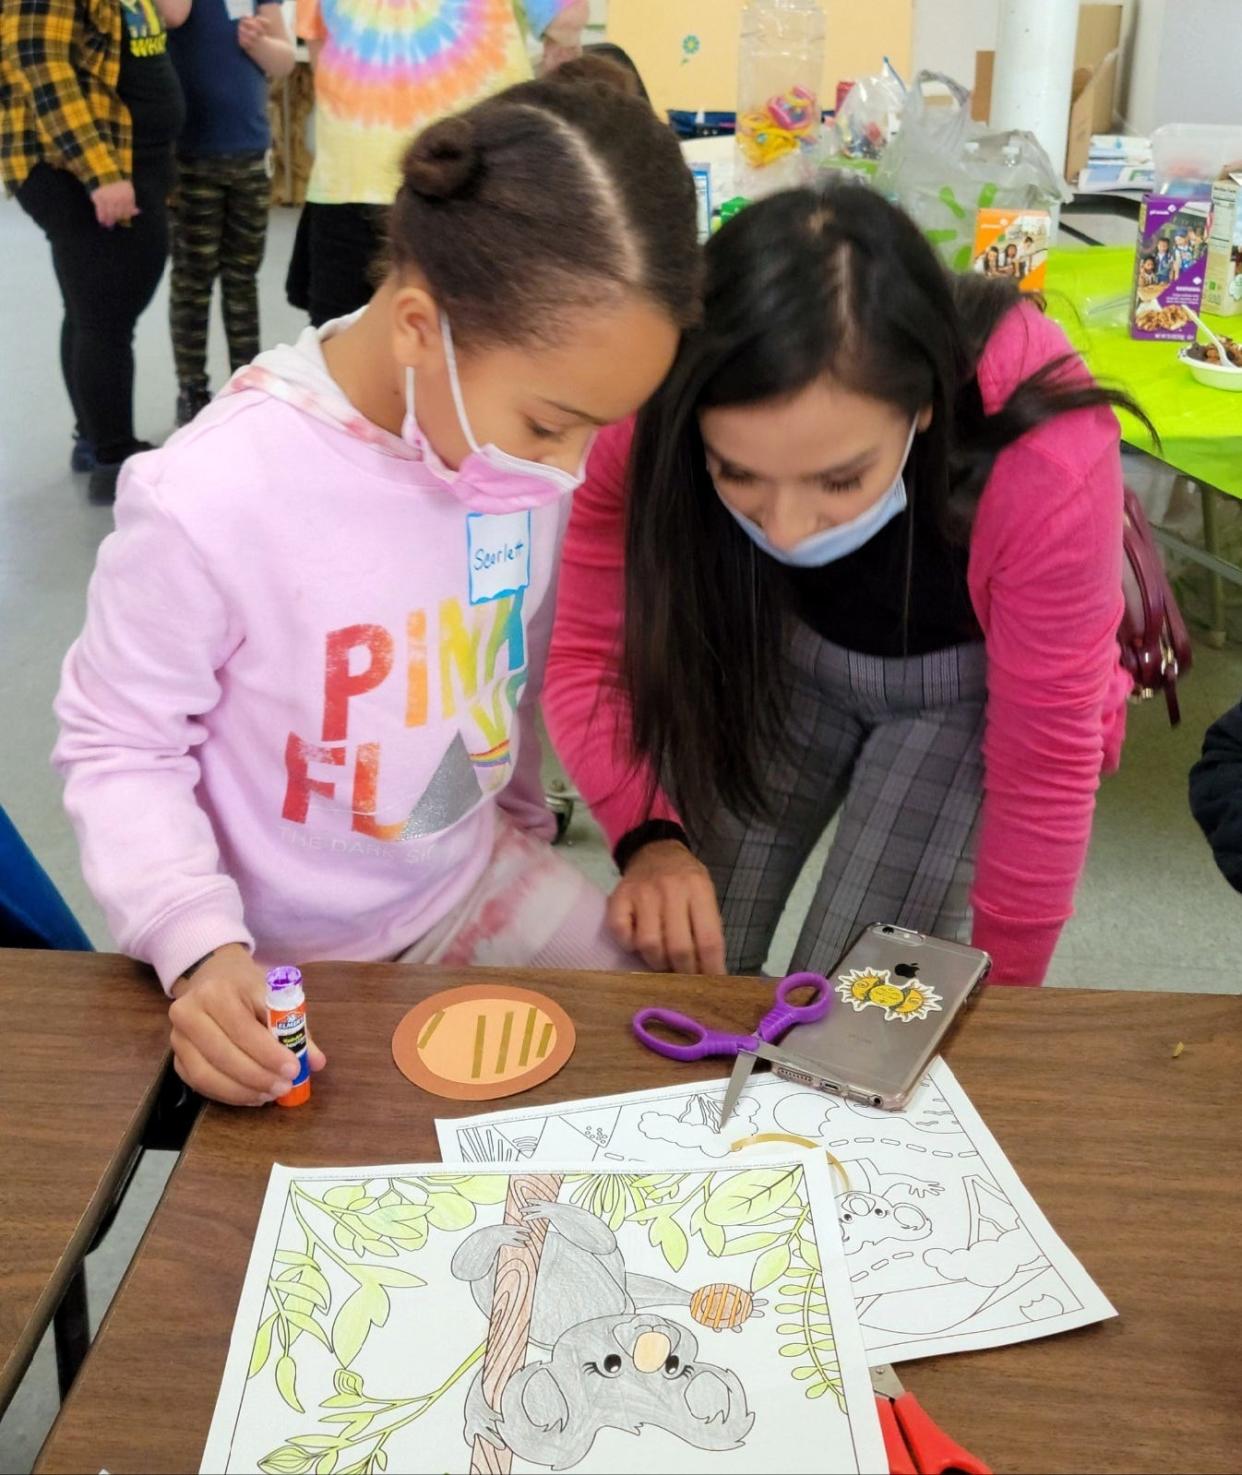 Angela Amaya helped her daughter Scarlett Claudio make a cookie nametag. during last Saturday's Girl Scout Cookie Kick-Off Party at the Deming Scout Hut.